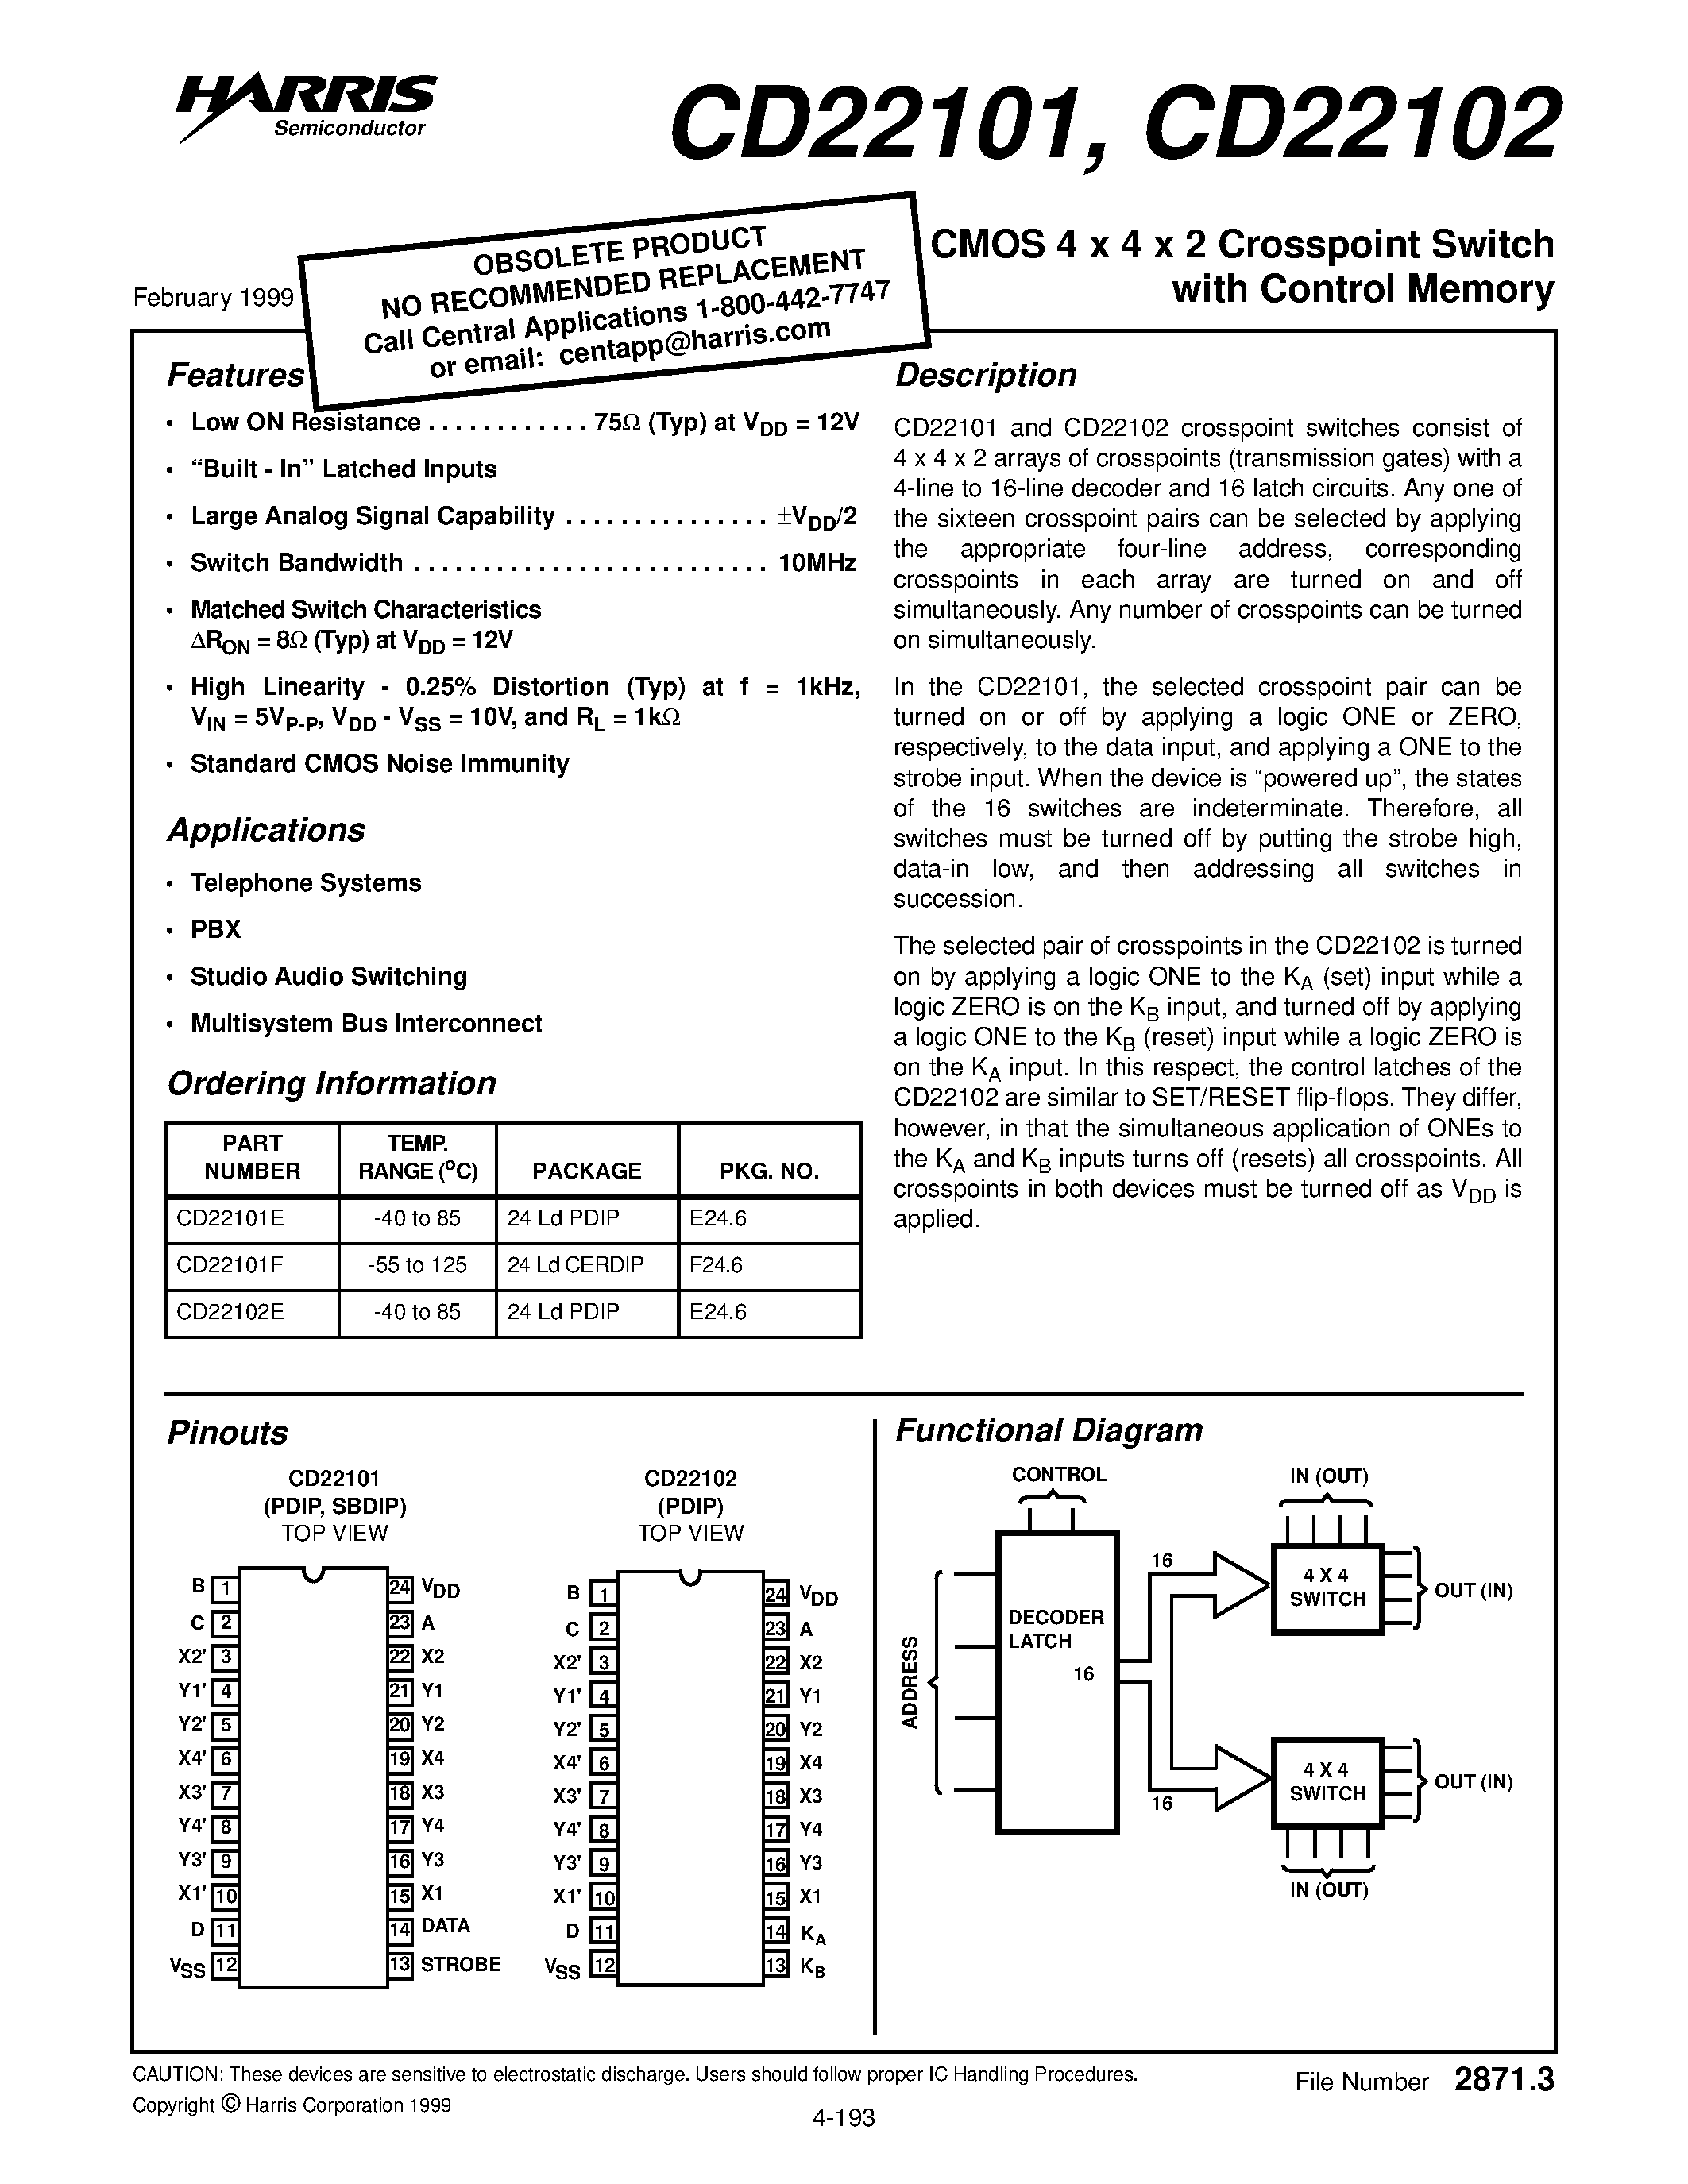 Datasheet CD22102 - CMOS 4 x 4 x 2 Crosspoint Switch with Control Memory page 1